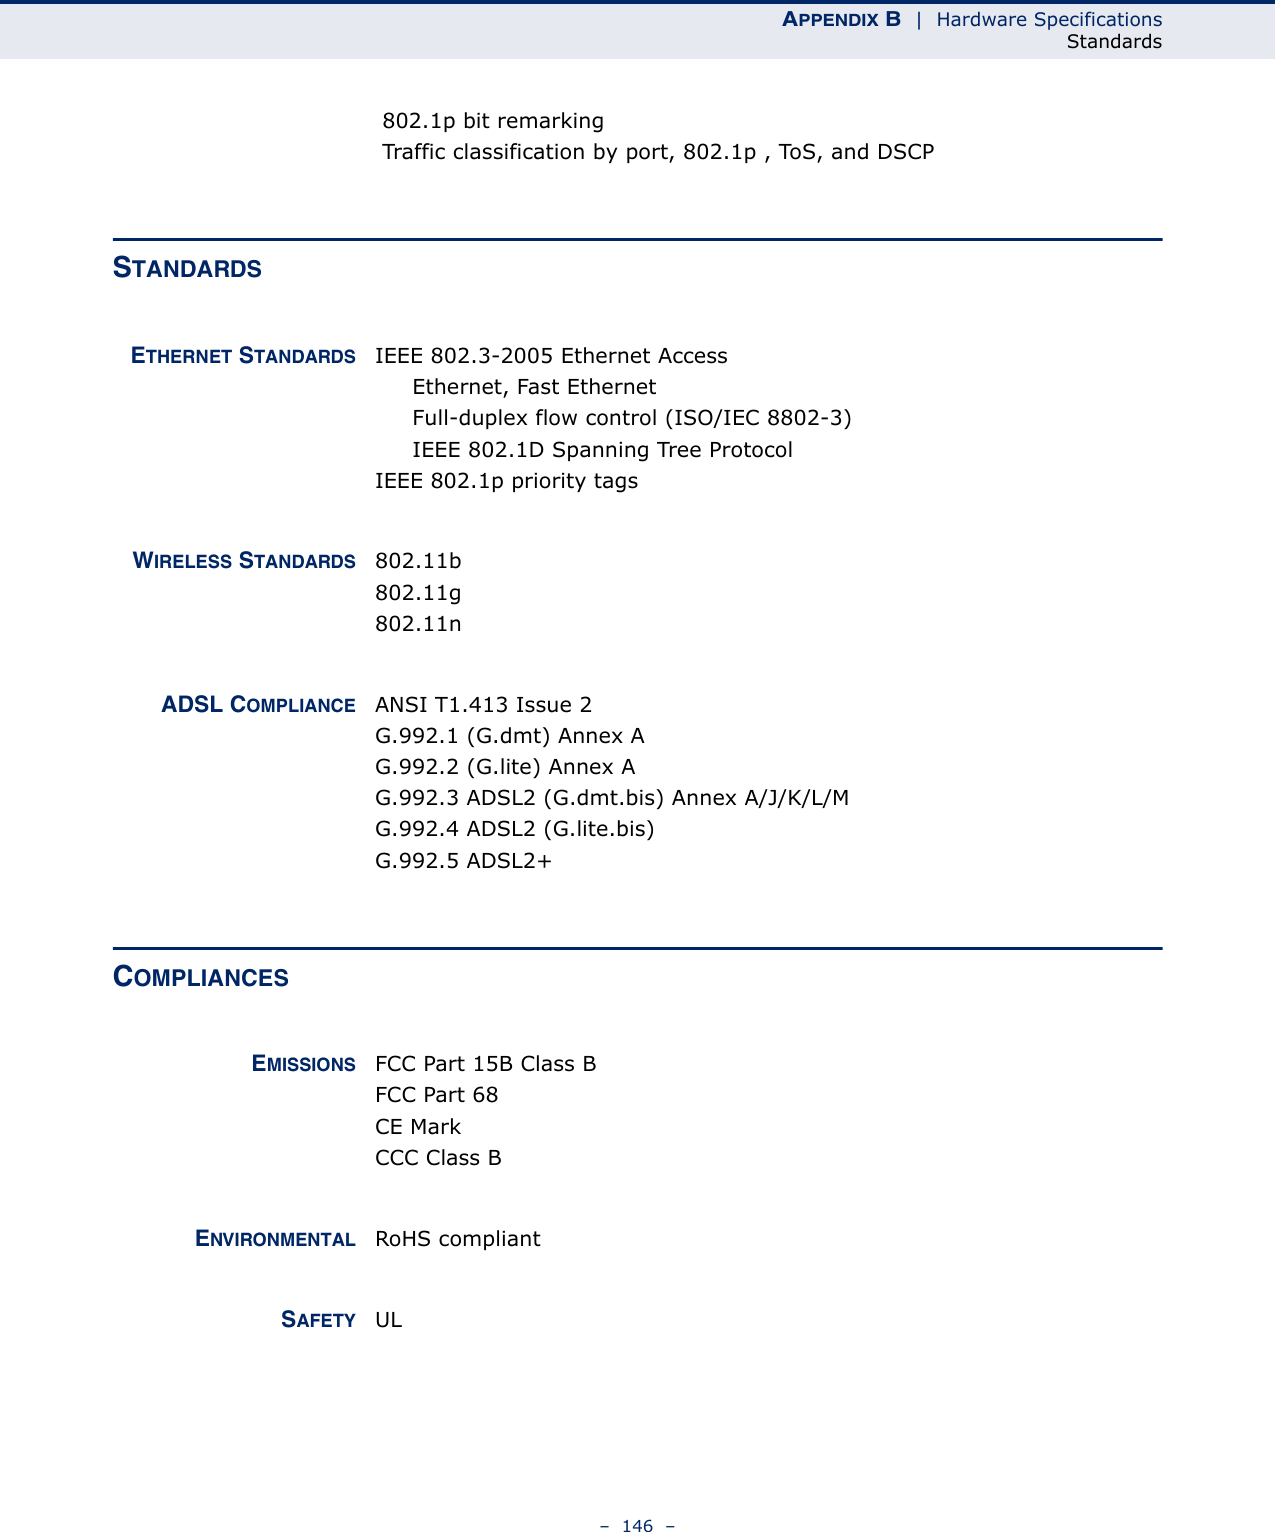 APPENDIX B  |  Hardware SpecificationsStandards–  146  – 802.1p bit remarking Traffic classification by port, 802.1p , ToS, and DSCPSTANDARDSETHERNET STANDARDS IEEE 802.3-2005 Ethernet AccessEthernet, Fast EthernetFull-duplex flow control (ISO/IEC 8802-3)IEEE 802.1D Spanning Tree ProtocolIEEE 802.1p priority tagsWIRELESS STANDARDS 802.11b802.11g802.11nADSL COMPLIANCE ANSI T1.413 Issue 2G.992.1 (G.dmt) Annex AG.992.2 (G.lite) Annex AG.992.3 ADSL2 (G.dmt.bis) Annex A/J/K/L/MG.992.4 ADSL2 (G.lite.bis) G.992.5 ADSL2+ COMPLIANCESEMISSIONS FCC Part 15B Class BFCC Part 68CE MarkCCC Class BENVIRONMENTAL RoHS compliantSAFETY UL 